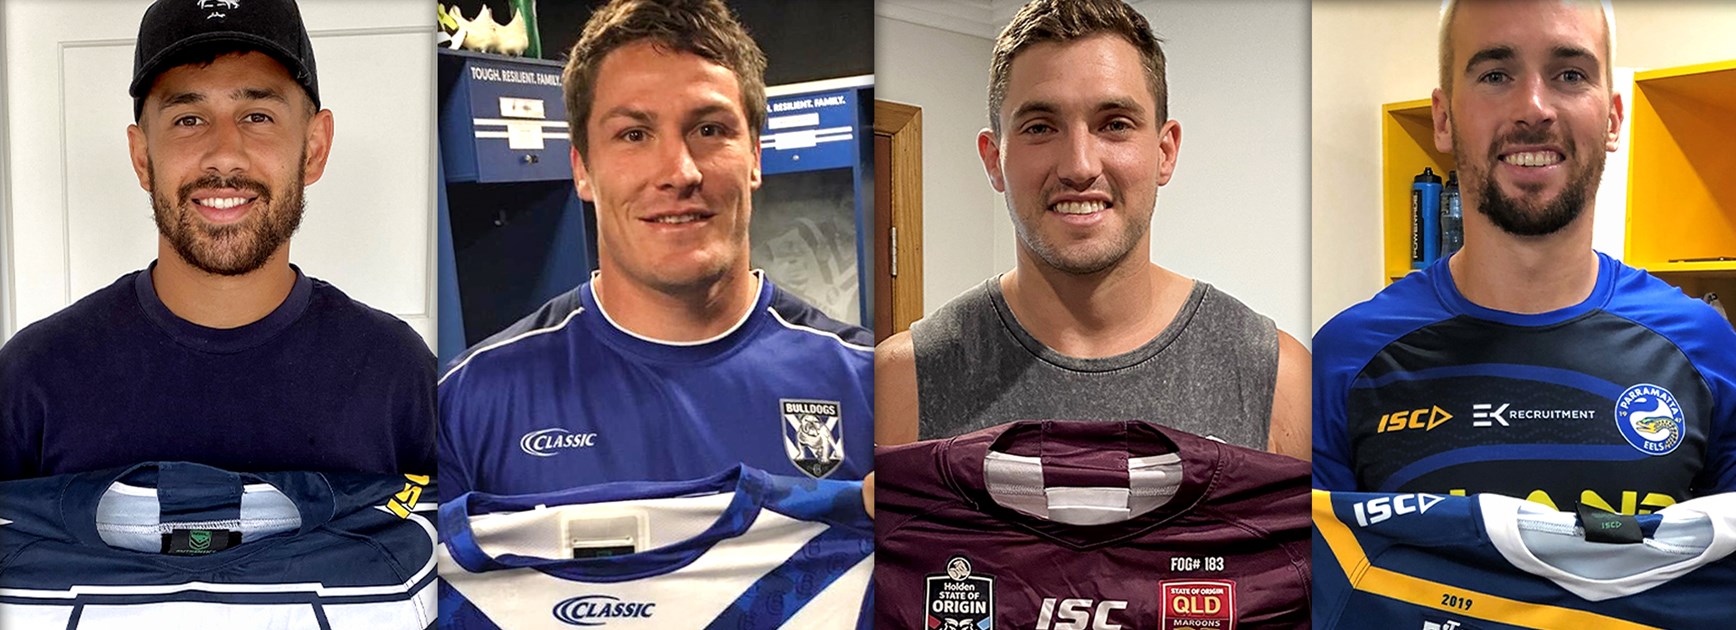 NRL stars auction jerseys to support Bushfire appeal